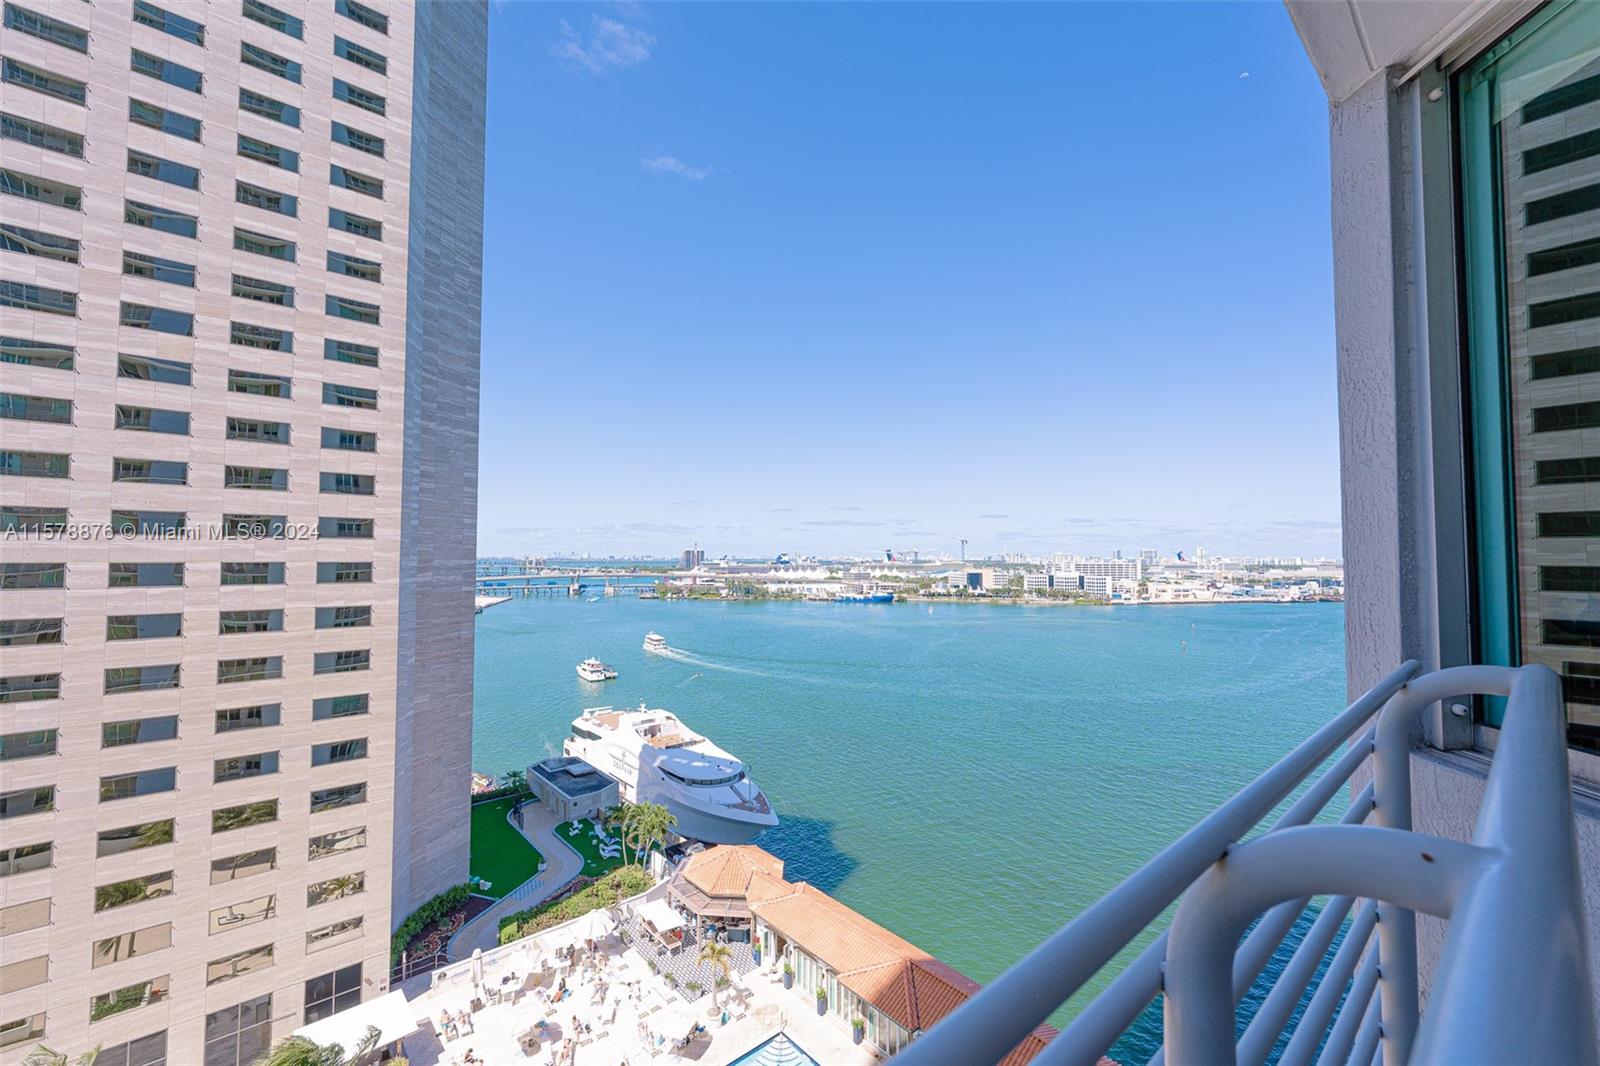 Beautiful 2 bedrooms 2 baths split plan condo overlooking Biscayne Bay and Port of Miami. Condo has with Wood kitchen cabinets with granite countertops backsplash and stainless steel appliances and marble countertop bath. 2 walk-in closets with window treatments throughout. Bldg amenities includes: 2 swimming pools, Jacuzzi, 2 Fitness Centers, 2 Party Rooms, Conference Room, Convenience Store, and 24 Hours Valet, Concierge, and Security. Centrally located within minutes to SoBe, Grove, Gables, Design District and Airport.